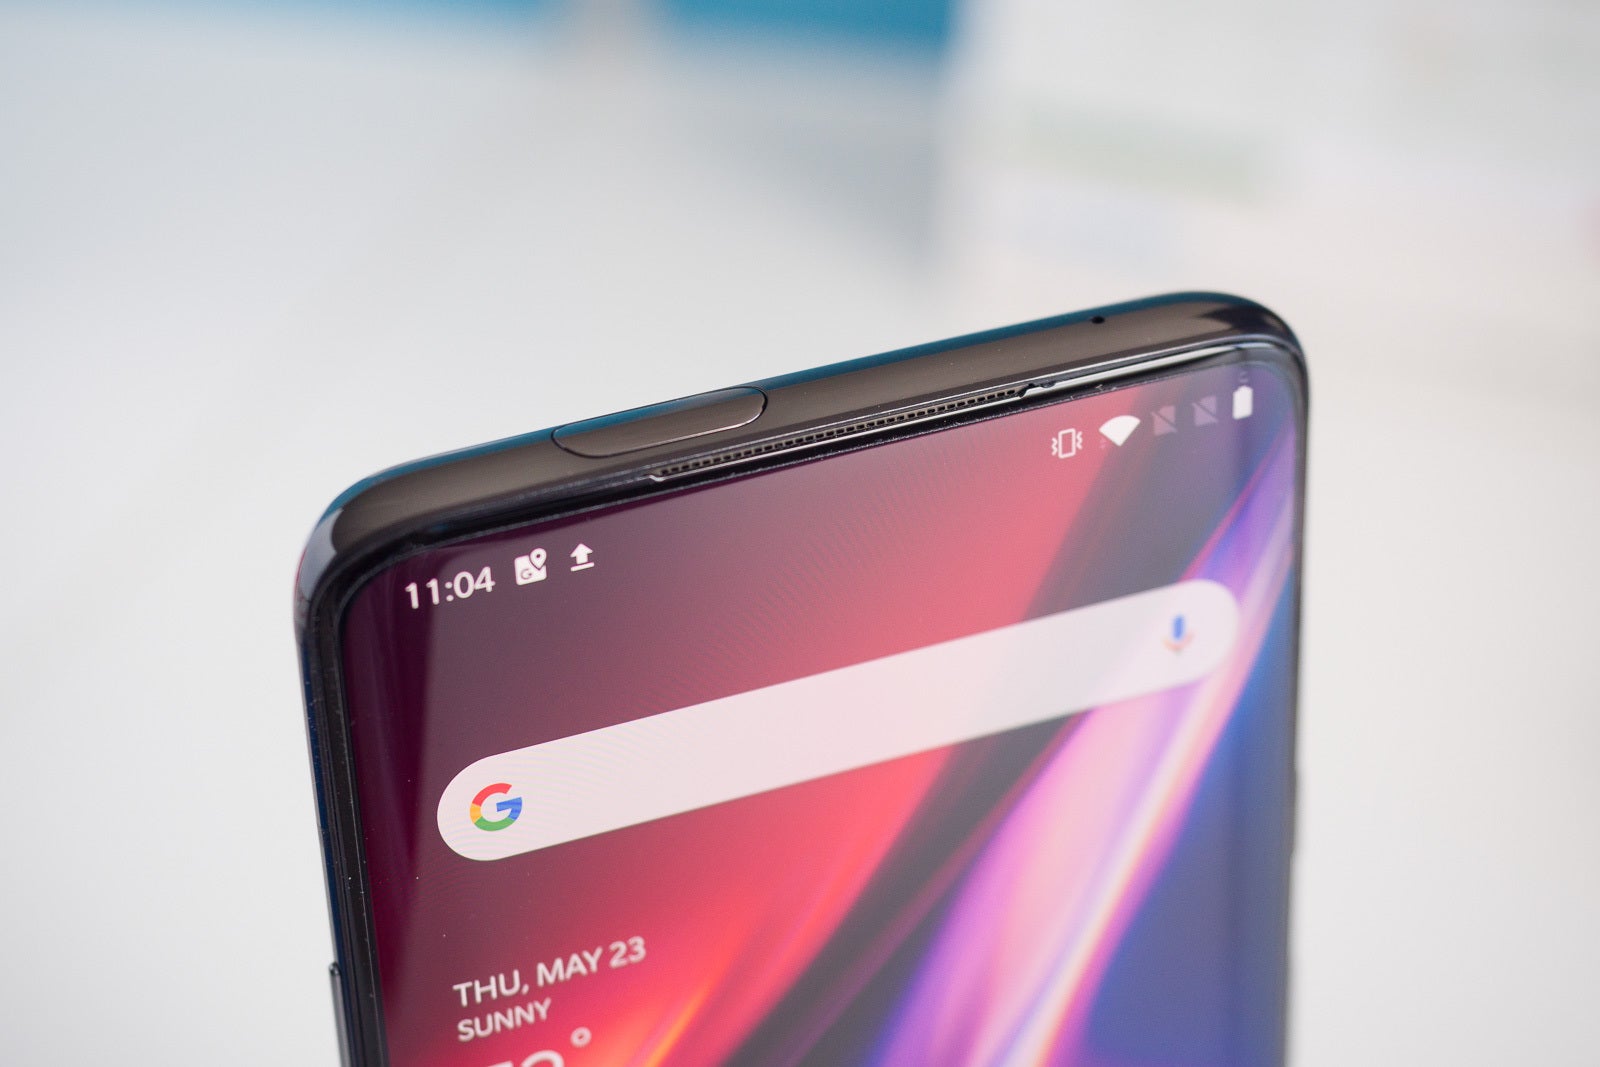 The OnePlus 7 Pro - Here's what the OnePlus 7T & 7T Pro might look like from the rear